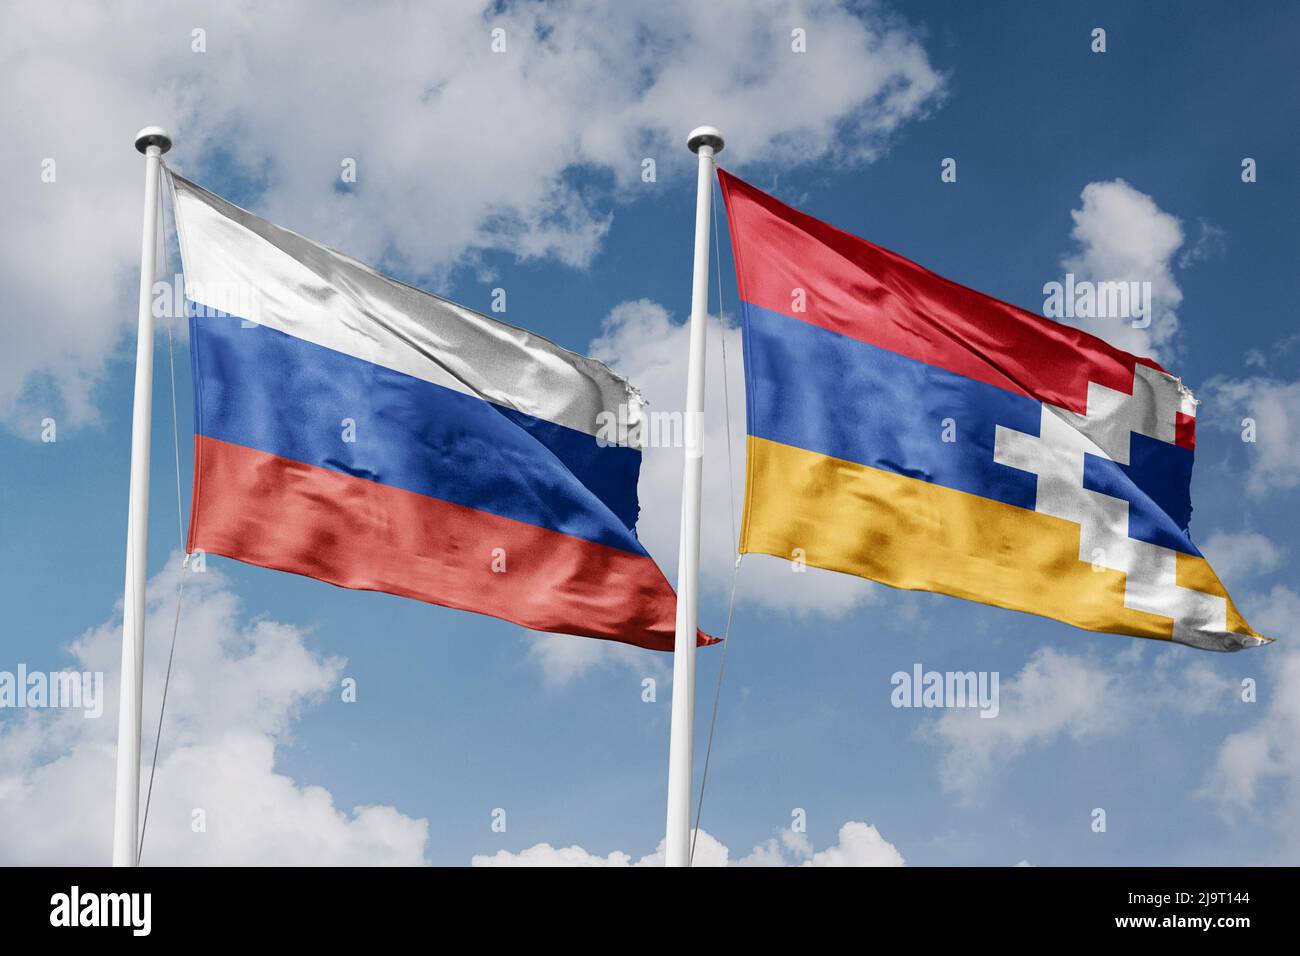 Russia and Artsakh two flags on flagpoles and blue cloudy sky background Stock Photo